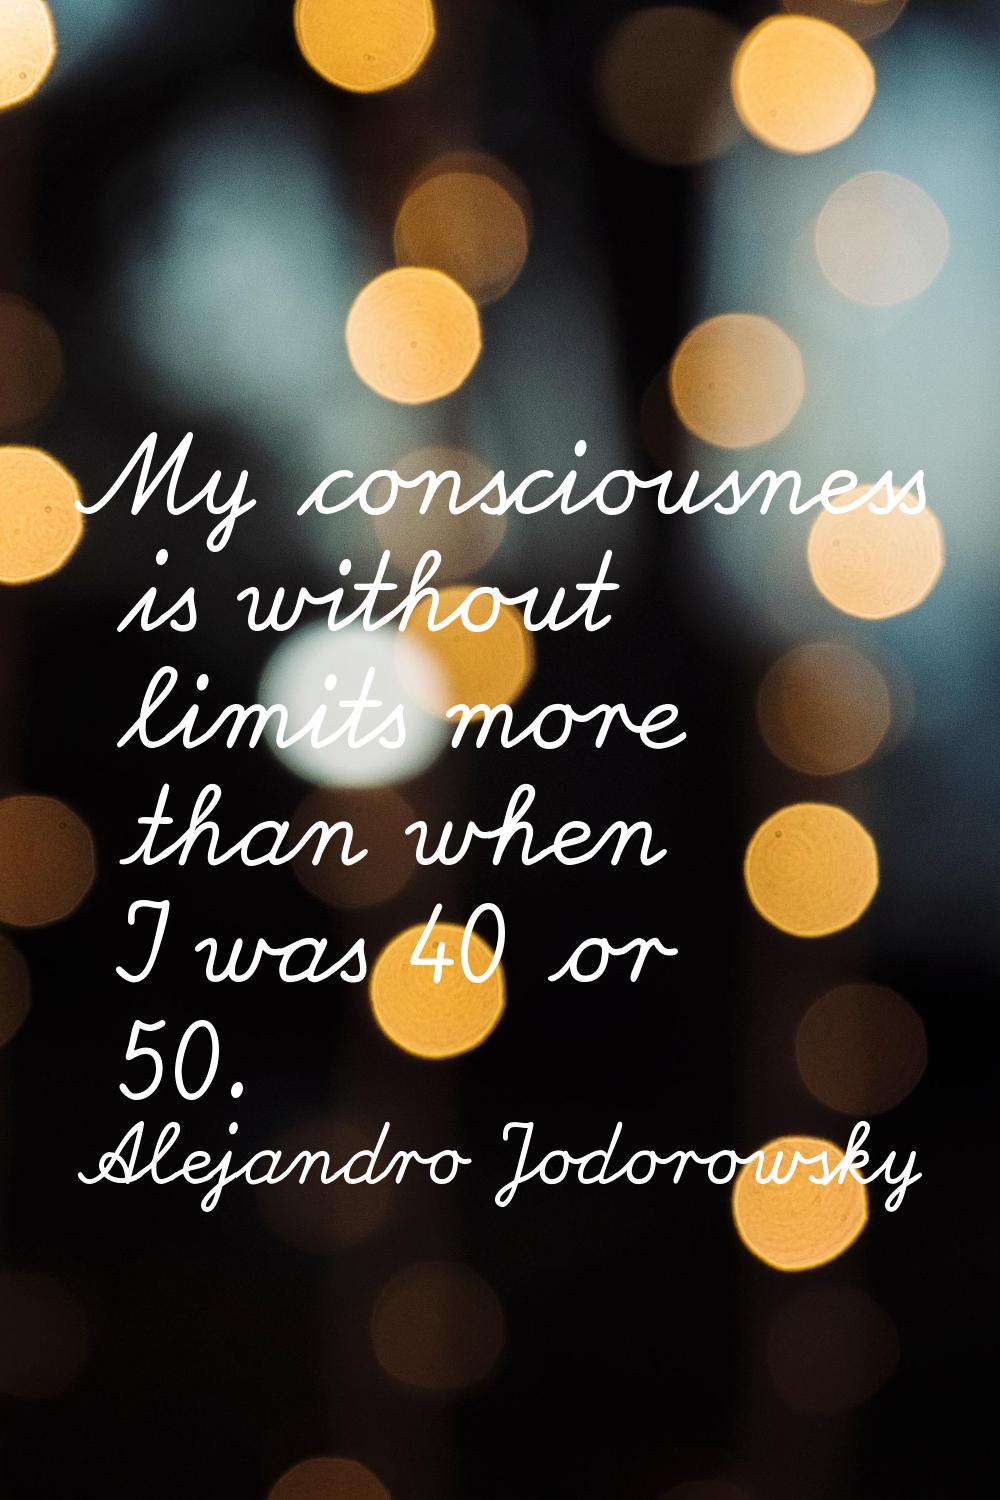 My consciousness is without limits more than when I was 40 or 50.